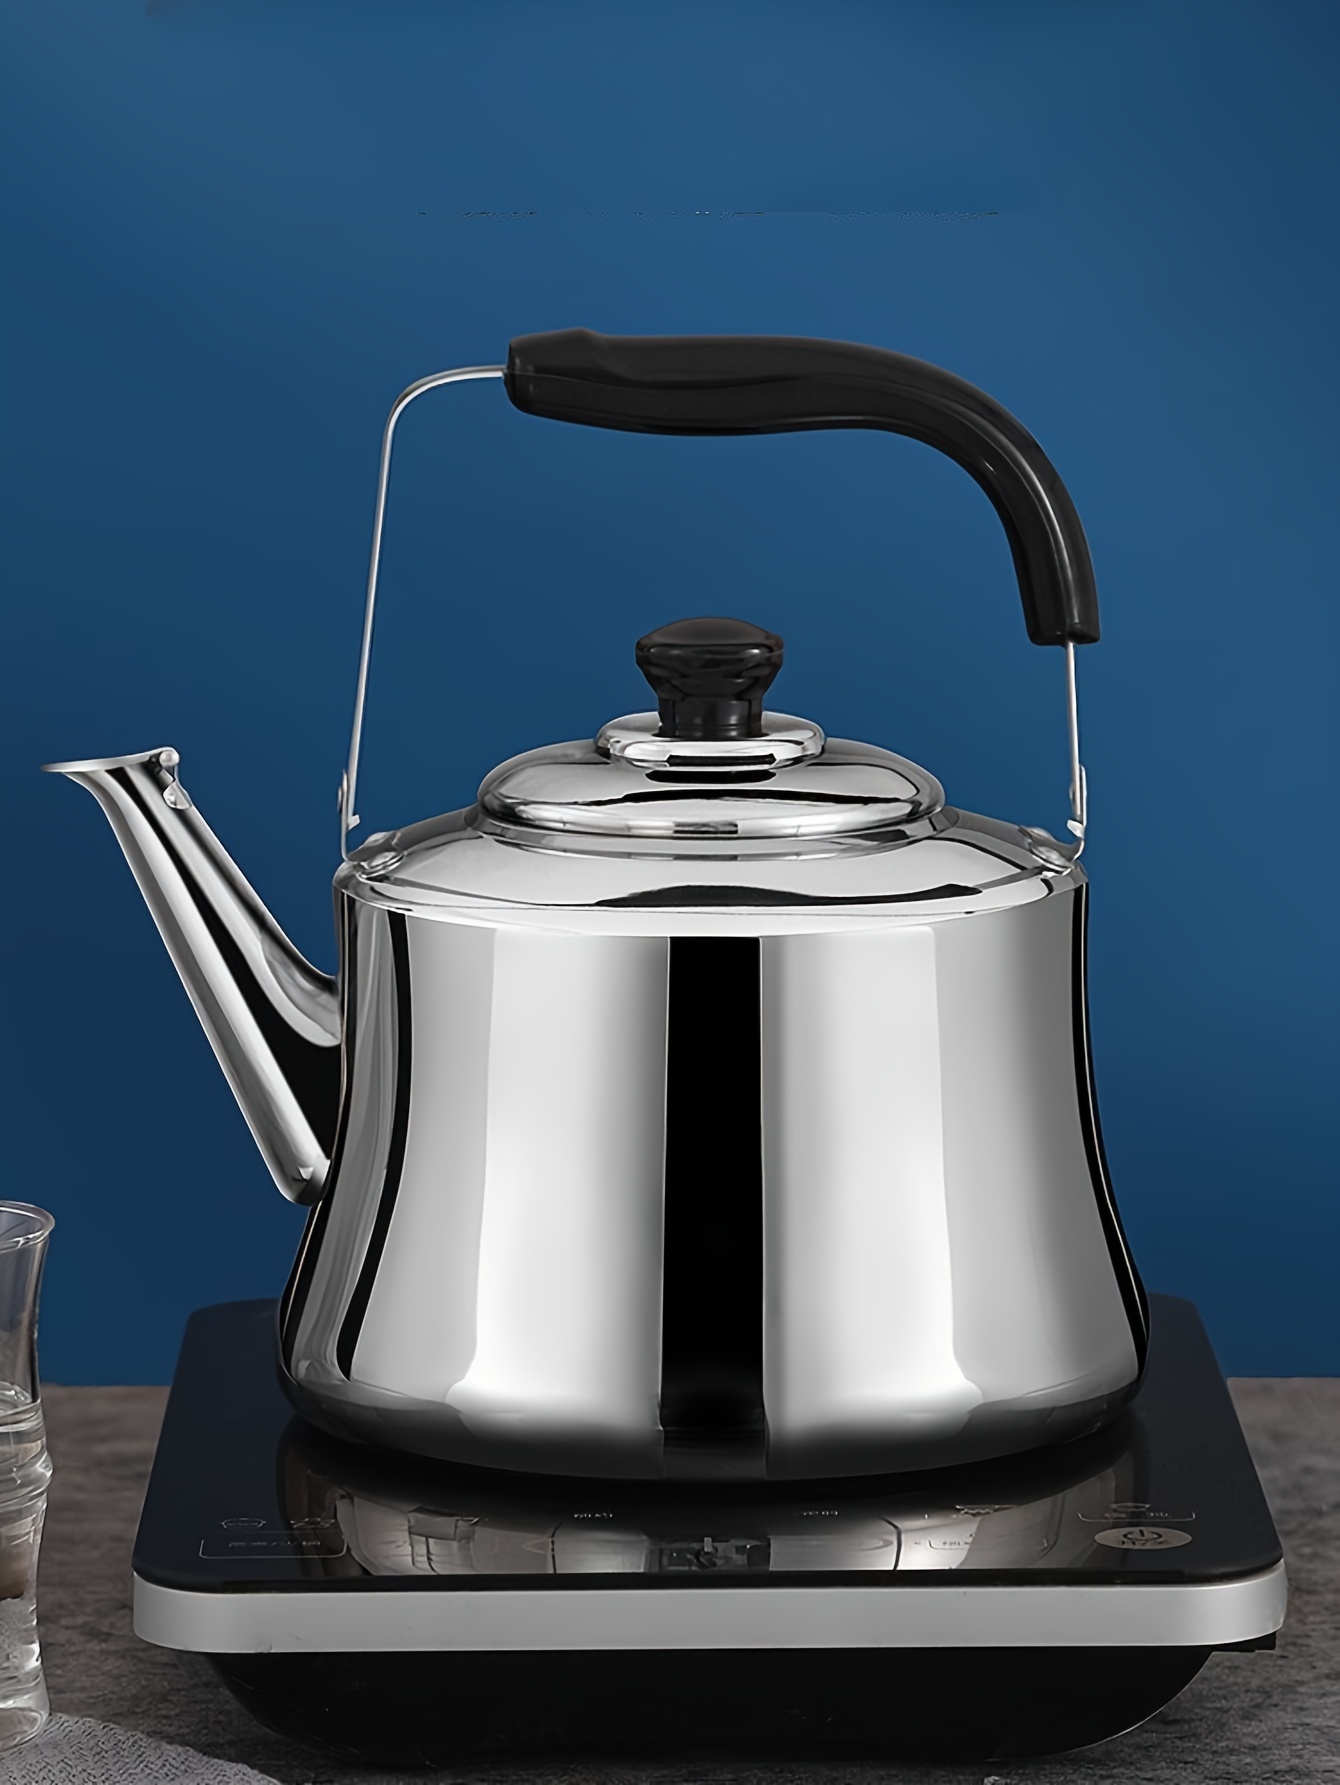 Sound Pot Teakettle Induction Cooker Whistling Thicken Water Heating Gas  Stove Boil Metal Jug Home-appliance